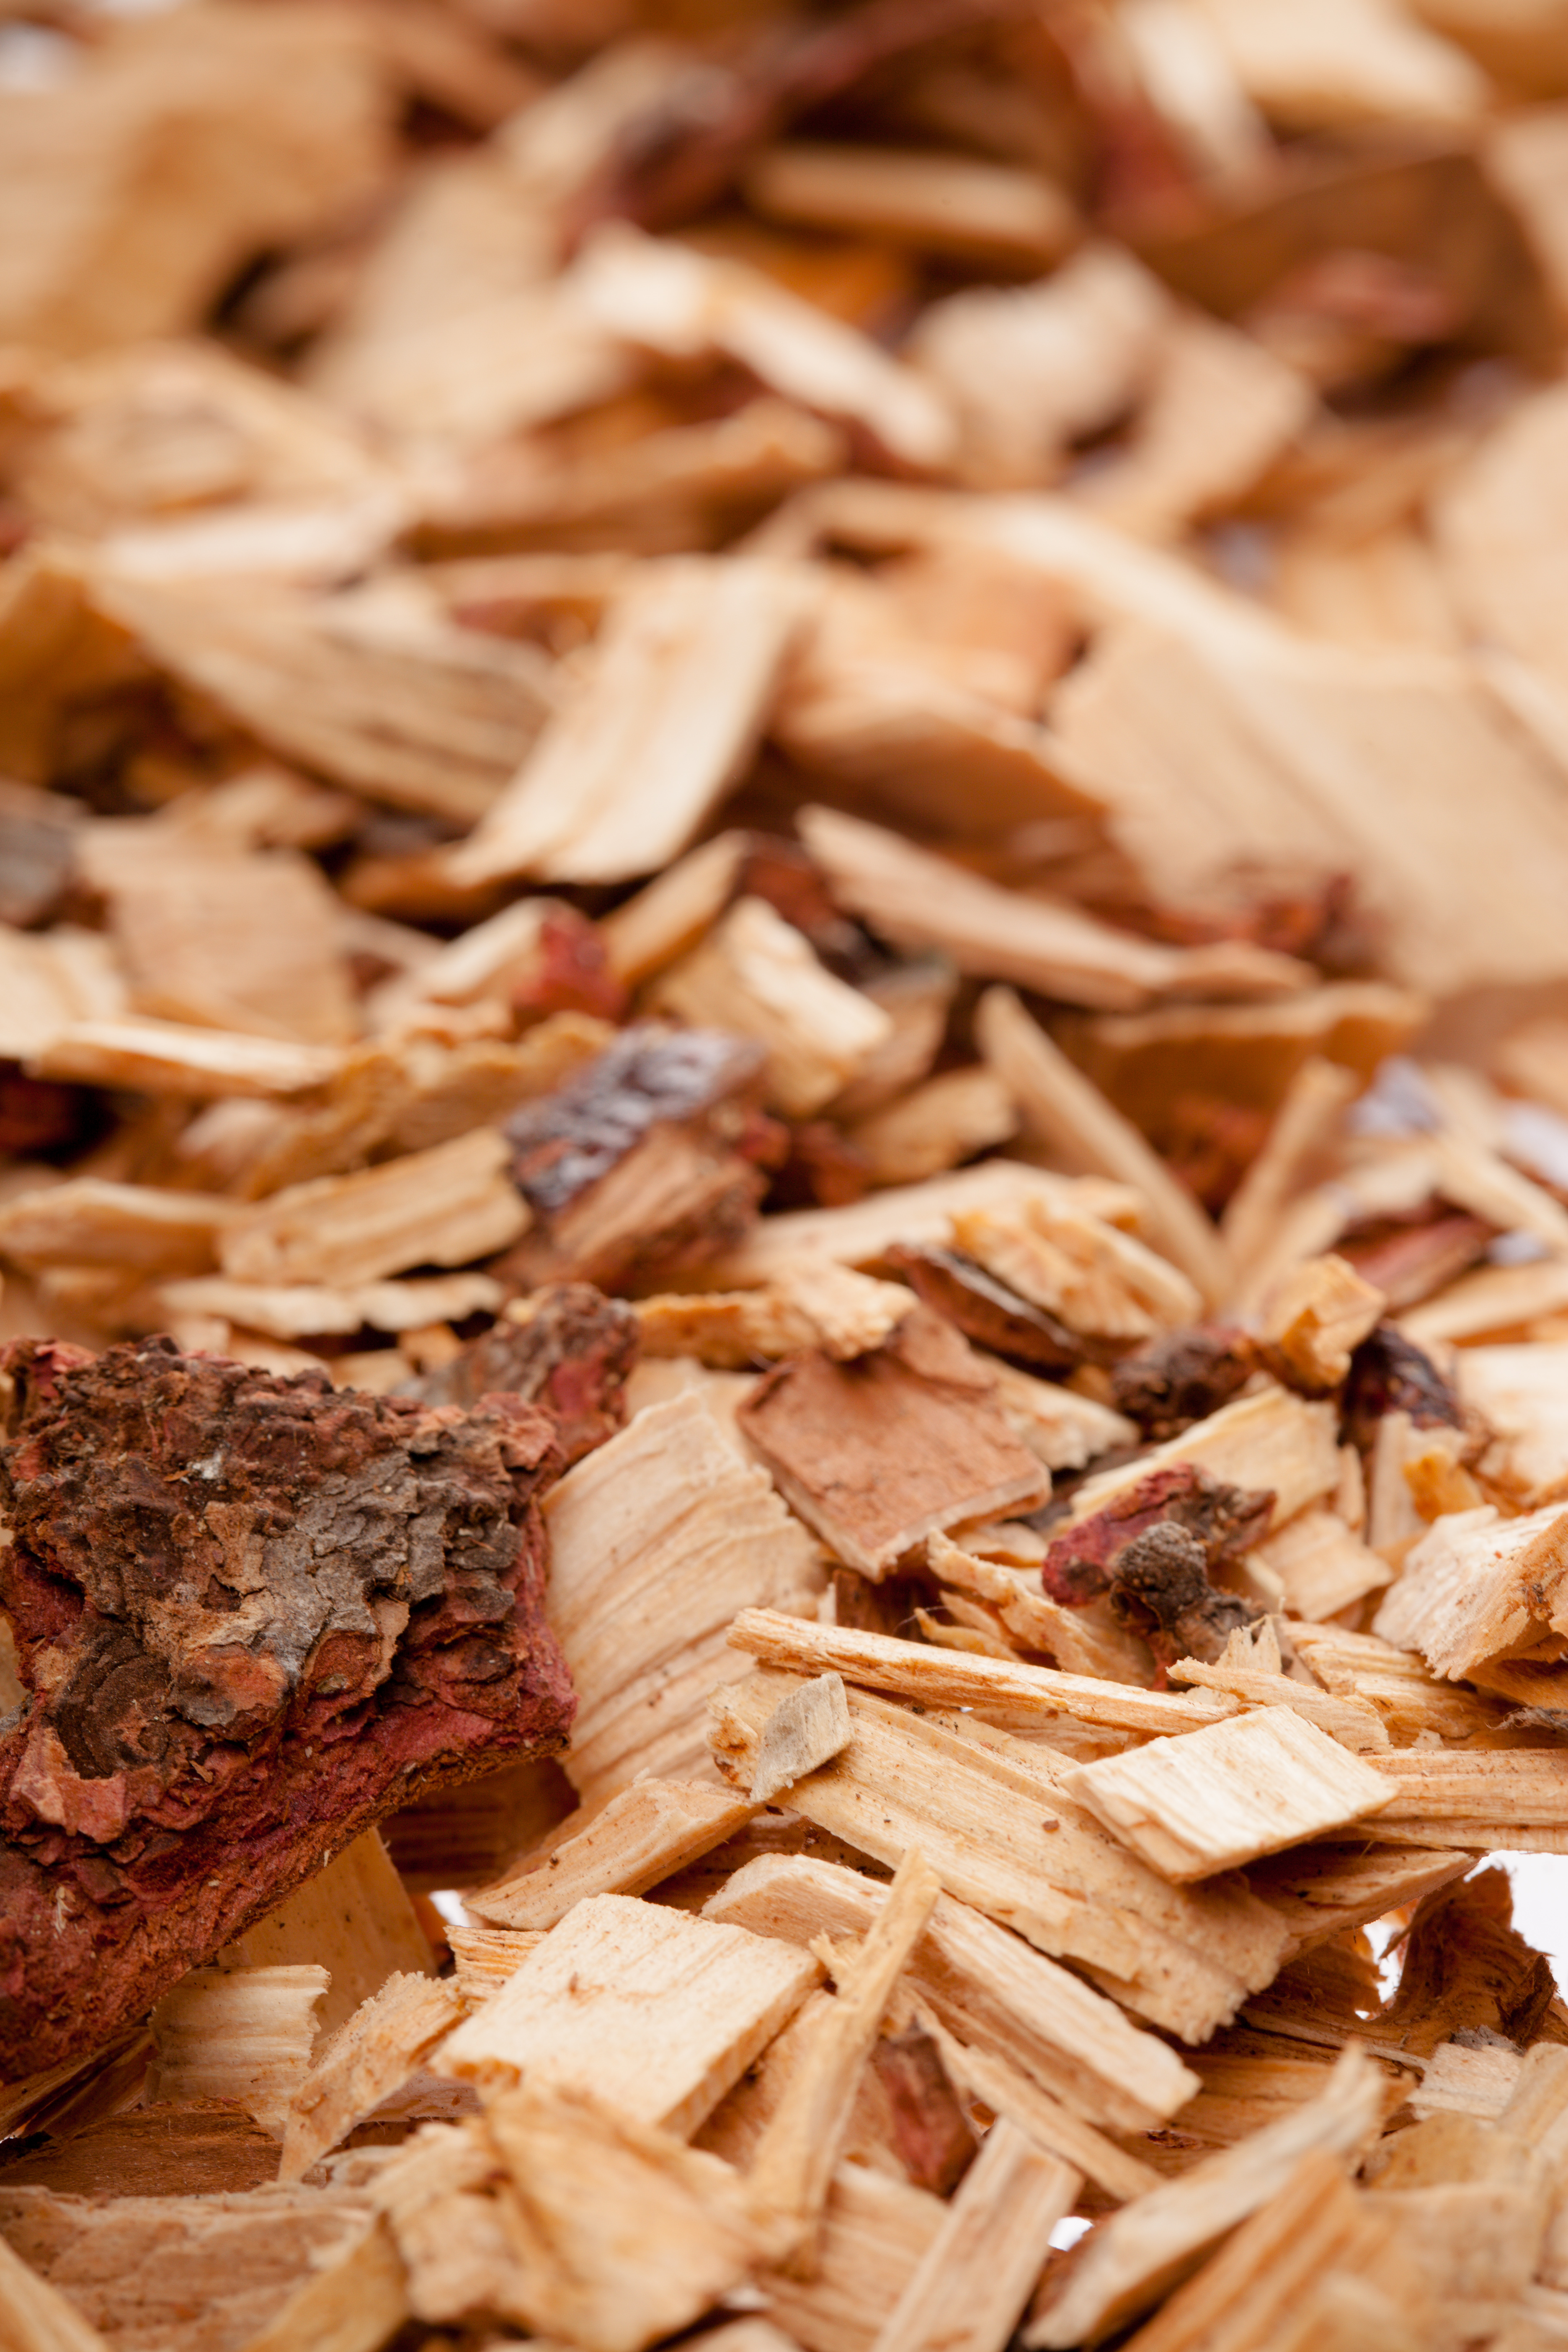 Wood Chips Texture, Abstract, Brown, Carpenter, Carpentry, HQ Photo